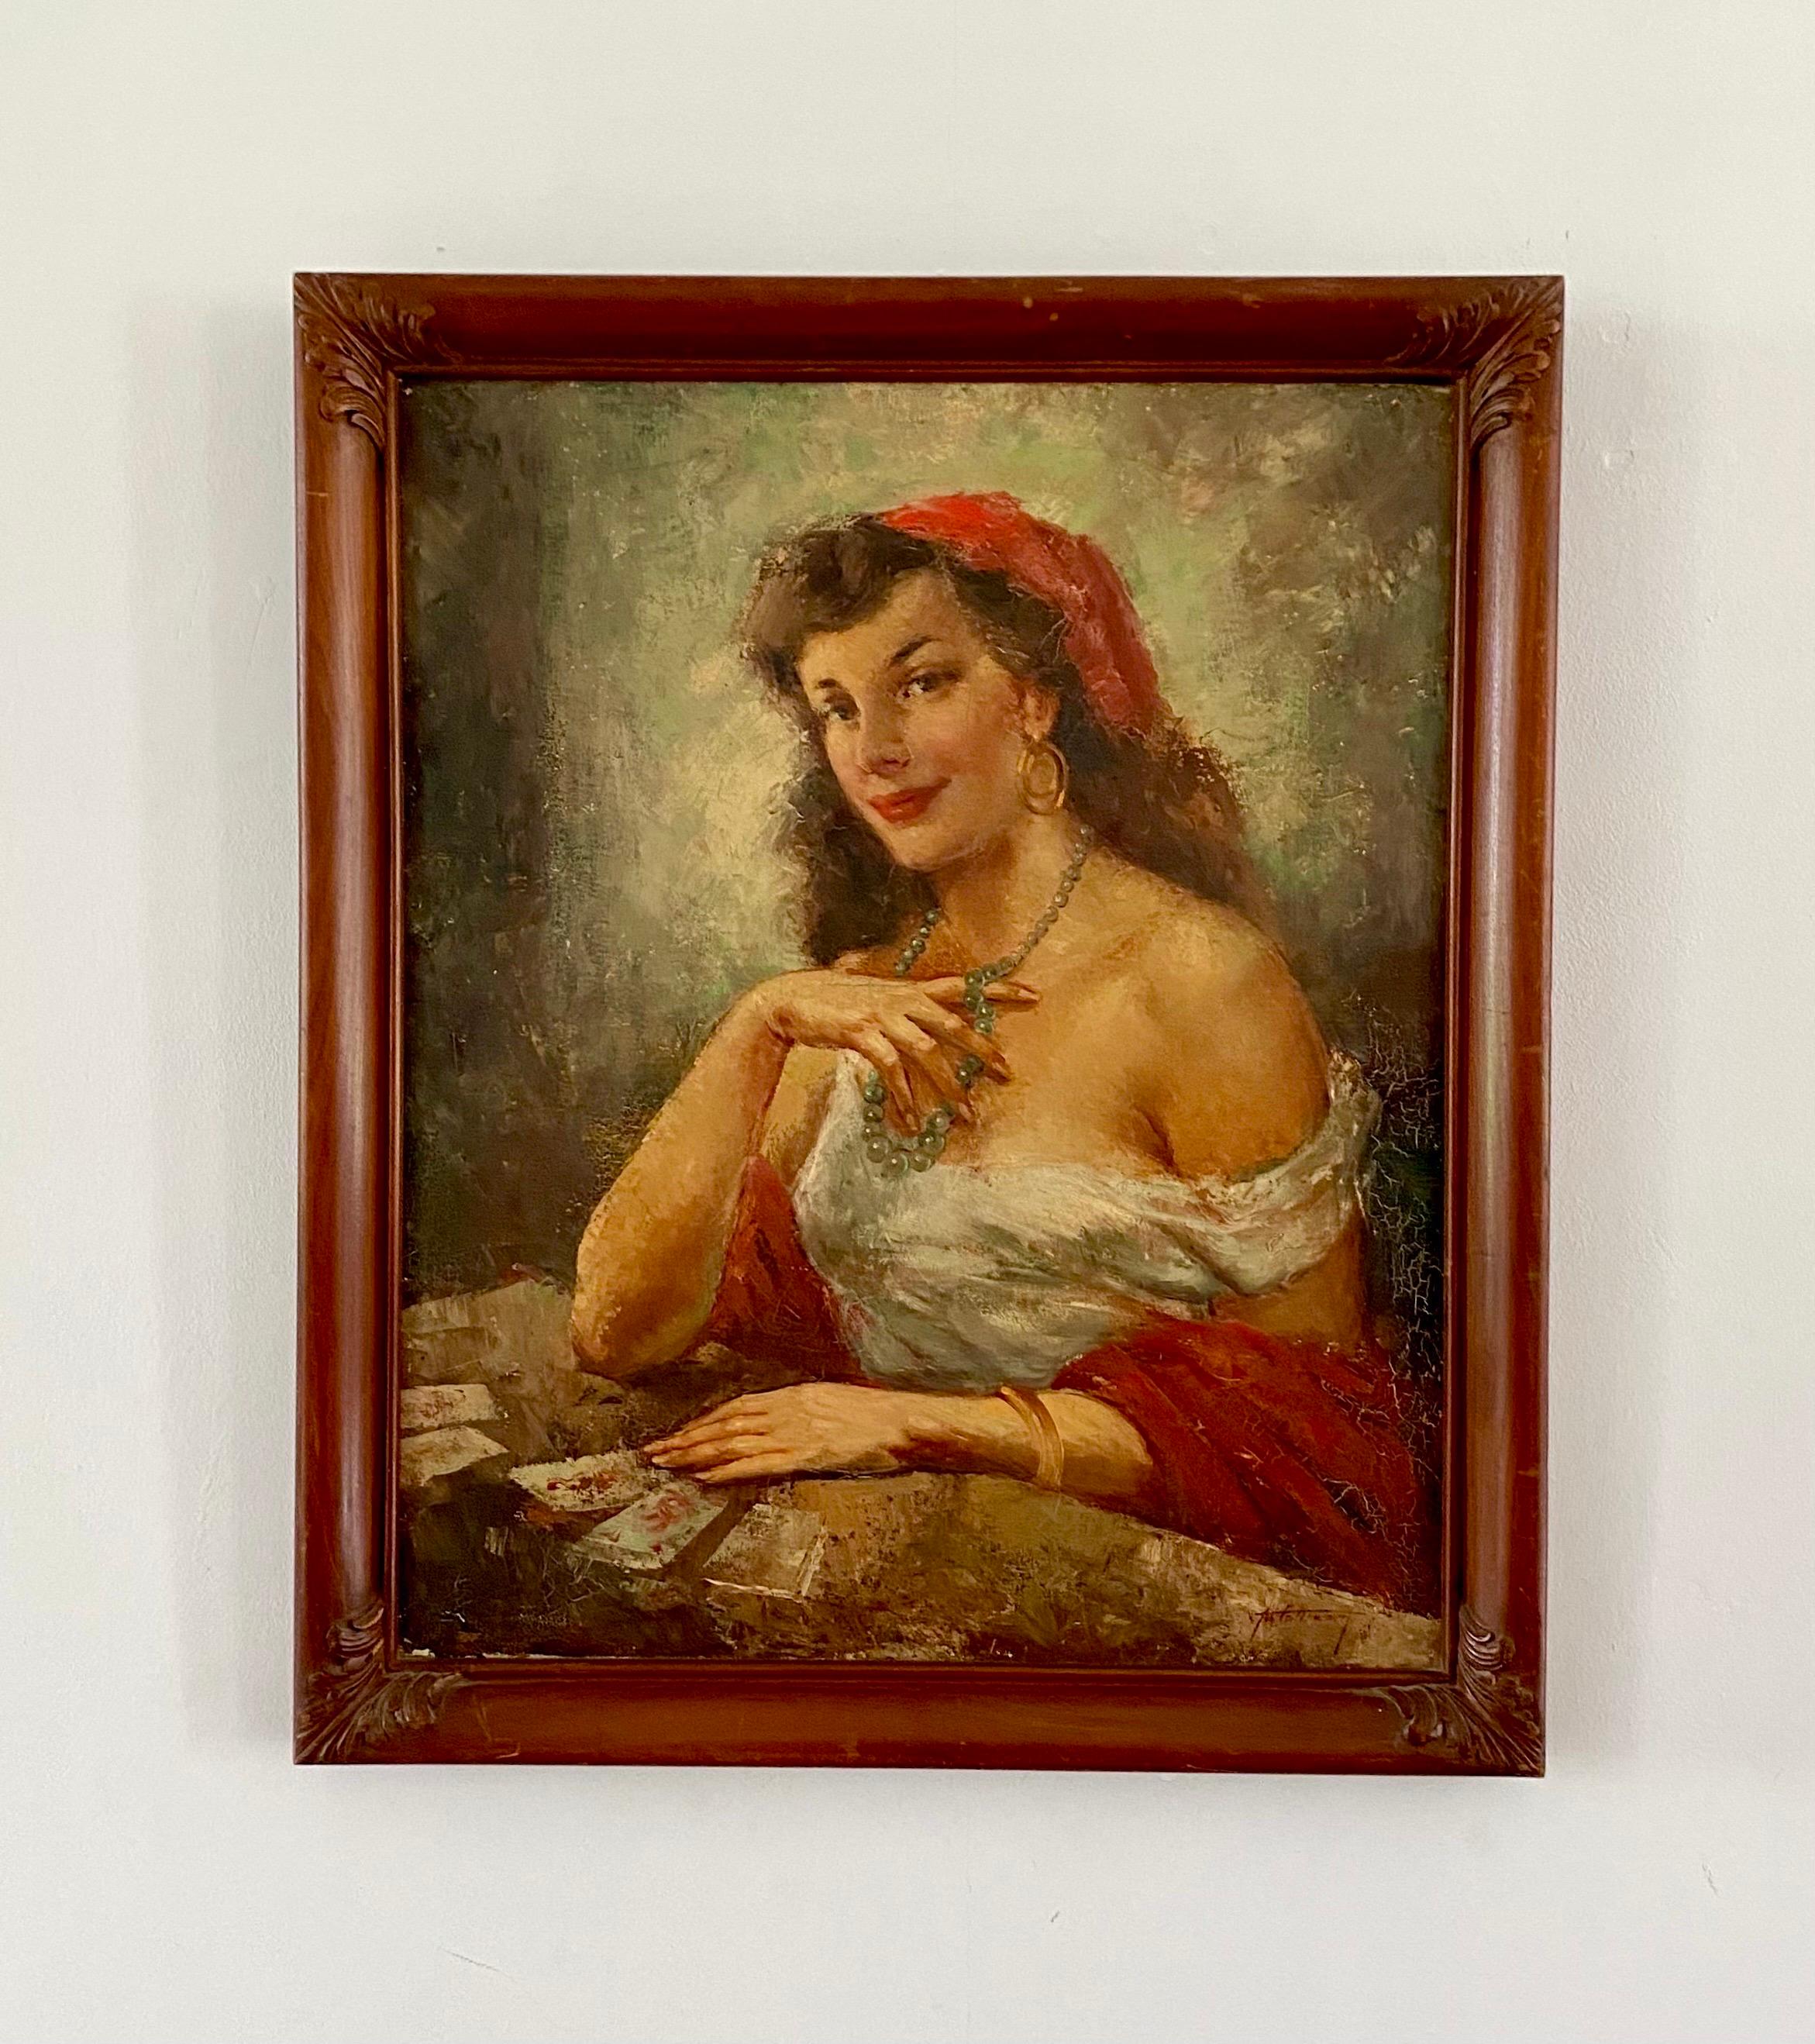 Framed Painting Representing Bohemian Gypsy Cartomancer, Signed Callewaert, 1940 For Sale 8